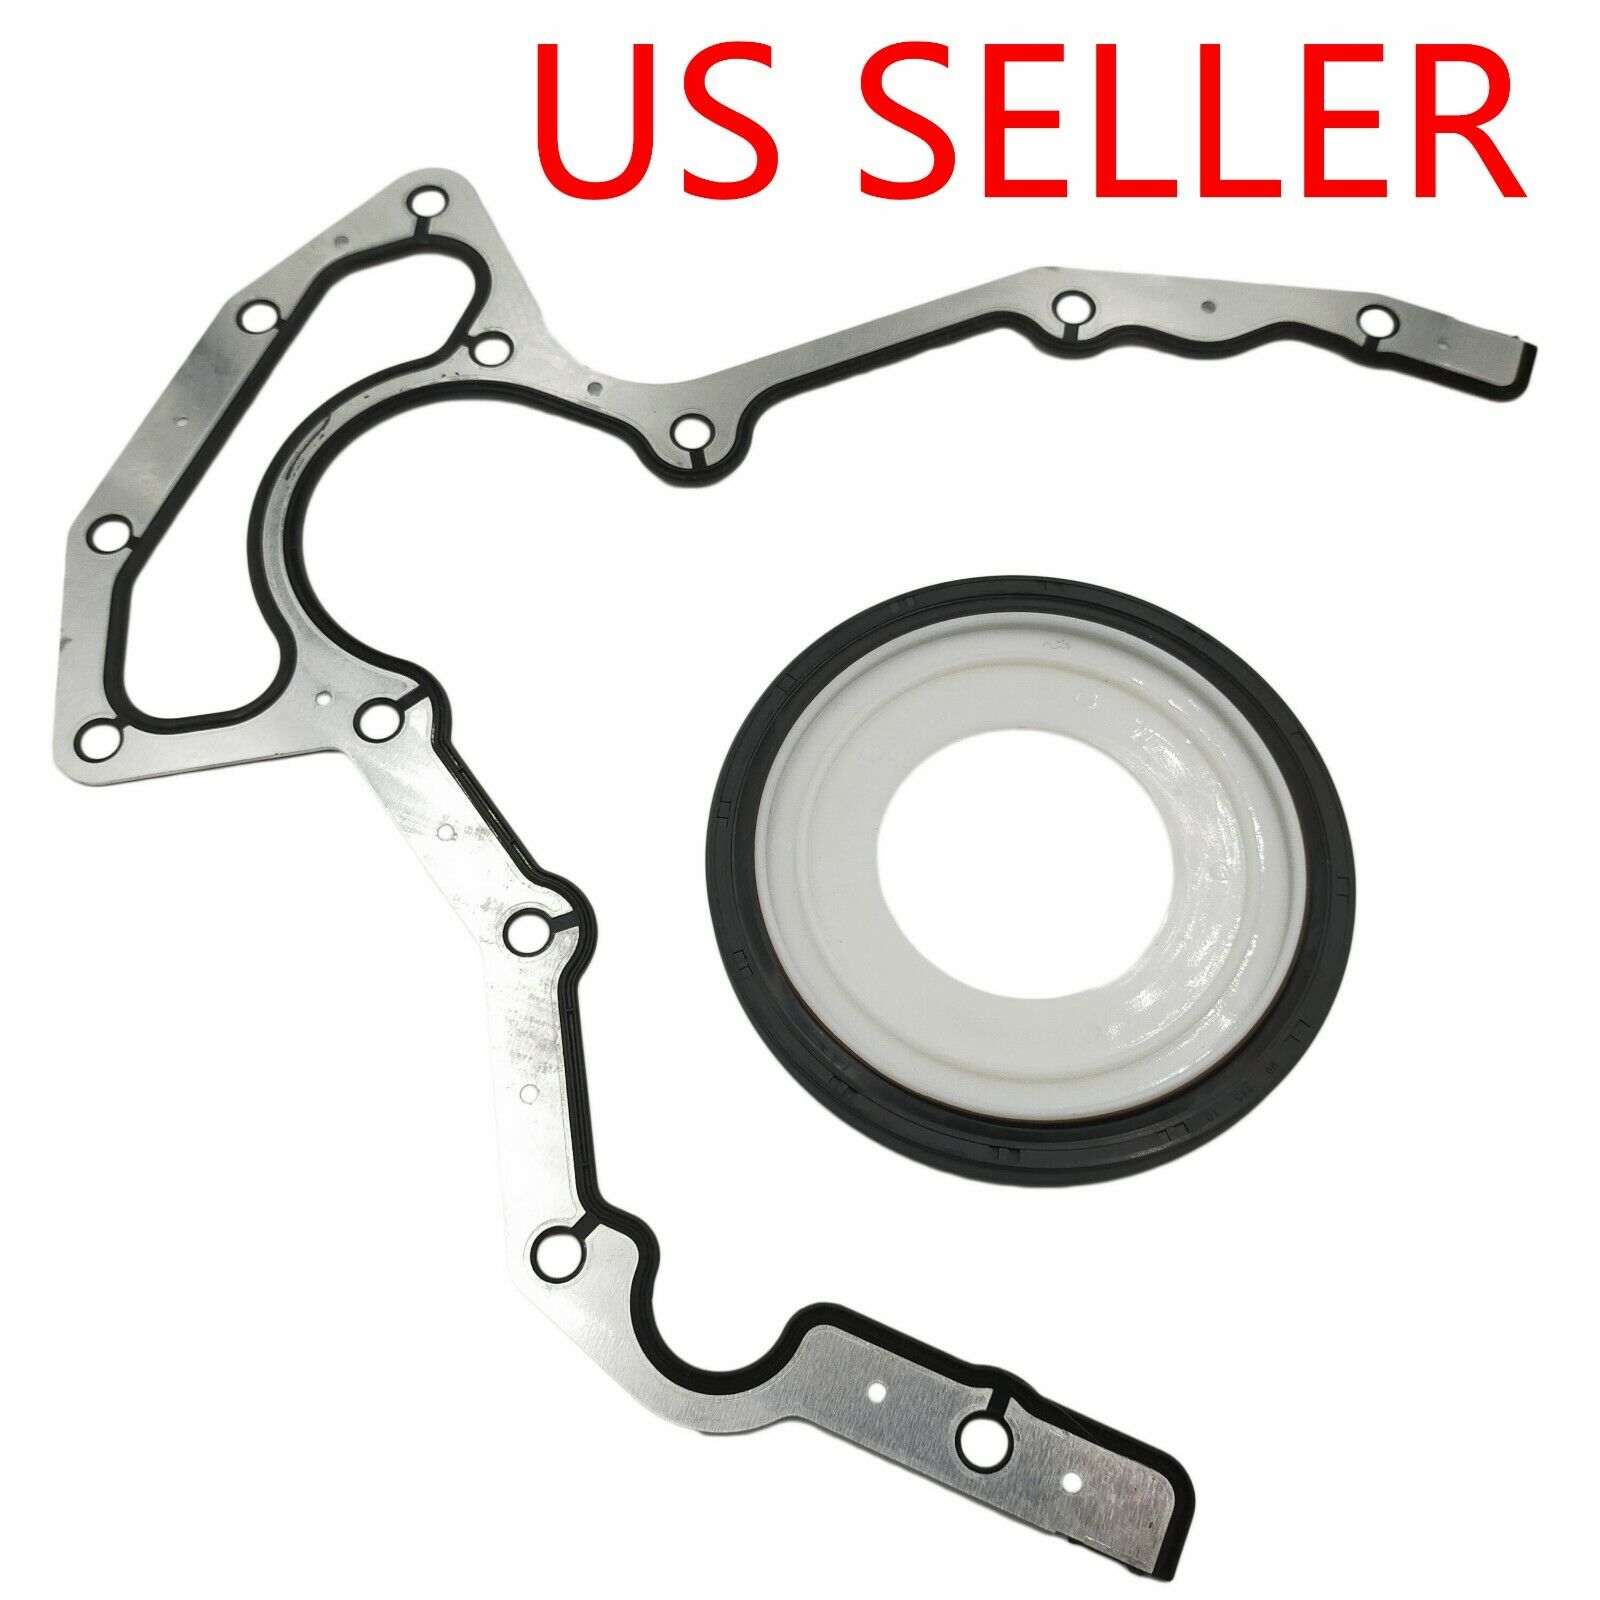 Rear Main Seal Block Cover Gasket Kit For BS40640 JV1657 LS 4.8 5.3 6.0L LS2 LS3